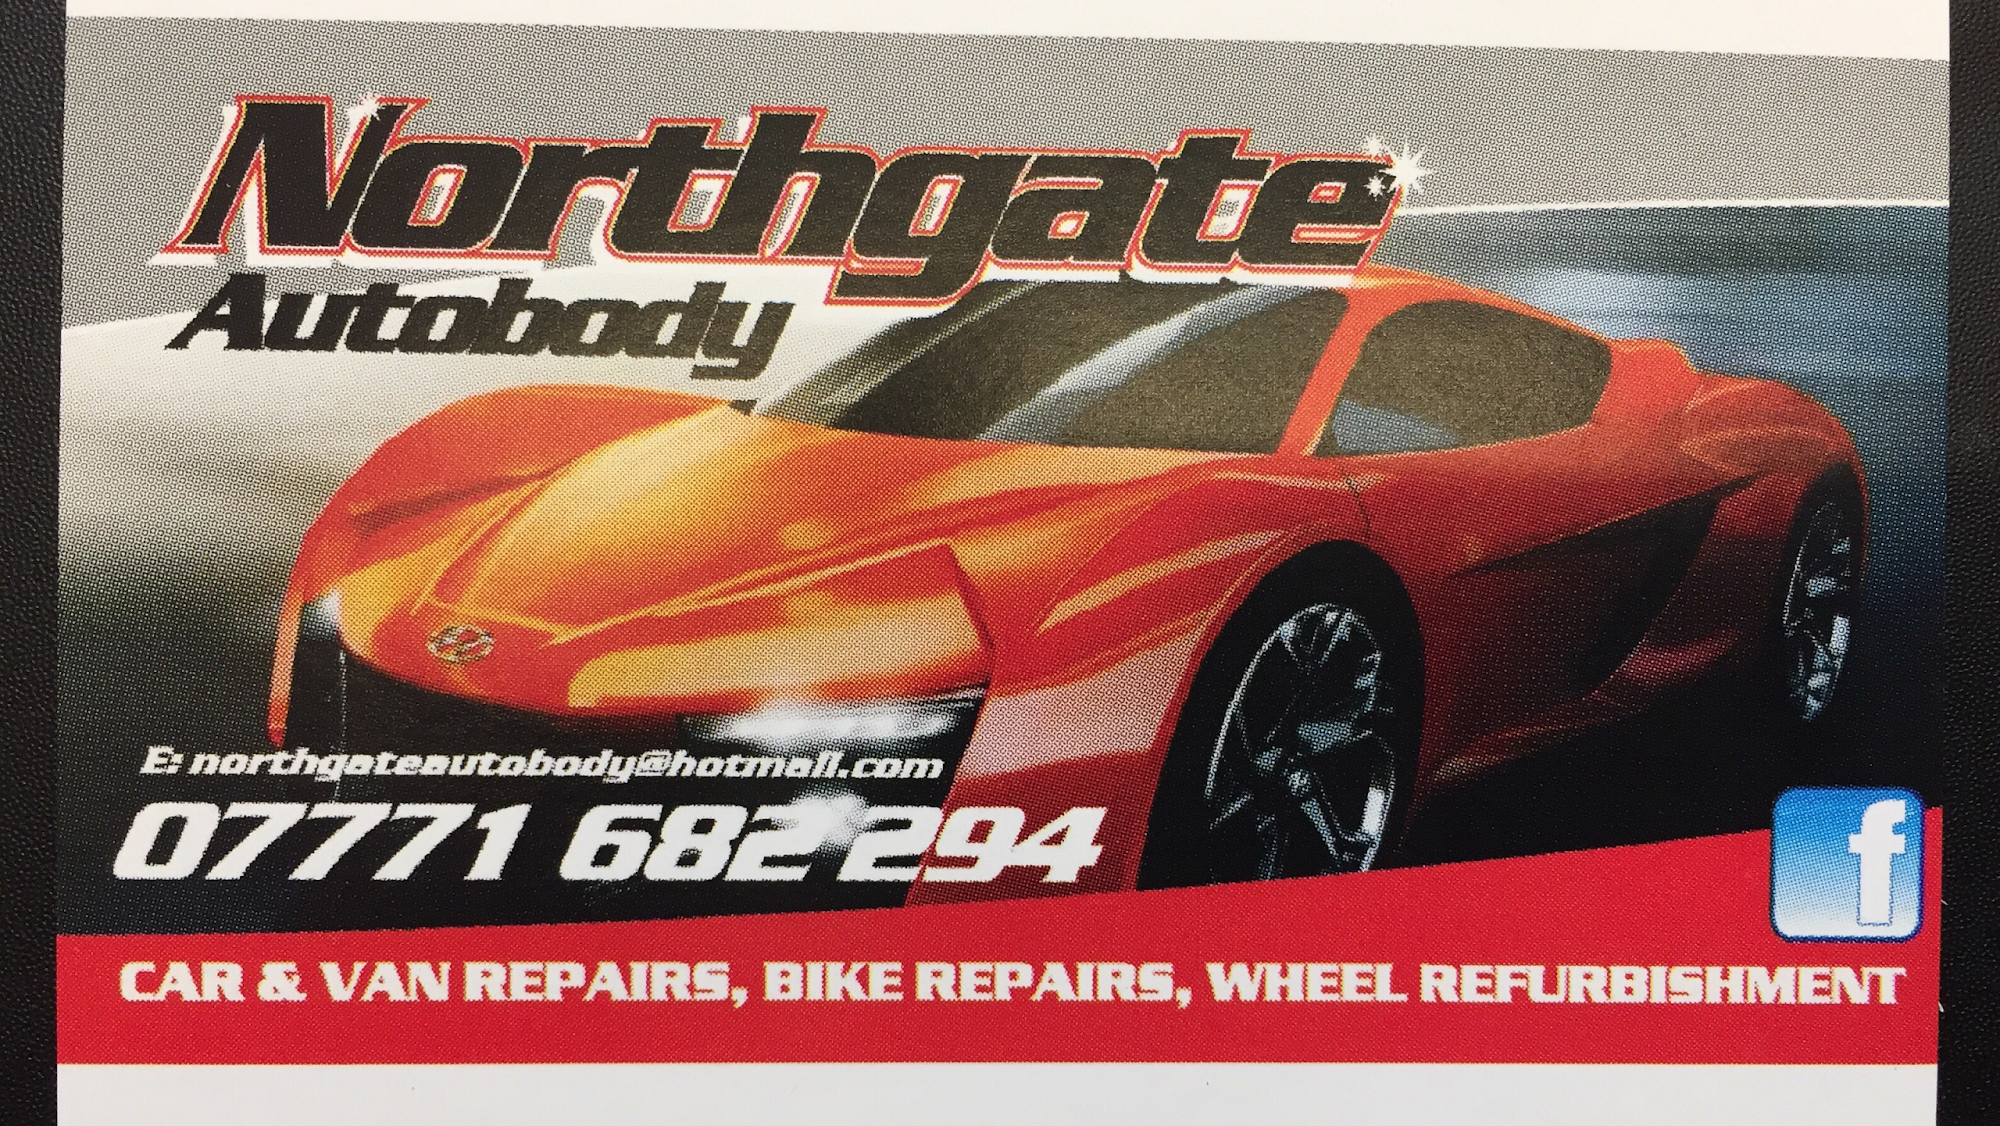 Northgate Autobody - Car body shop, accident repair, dent removal and paint repair.